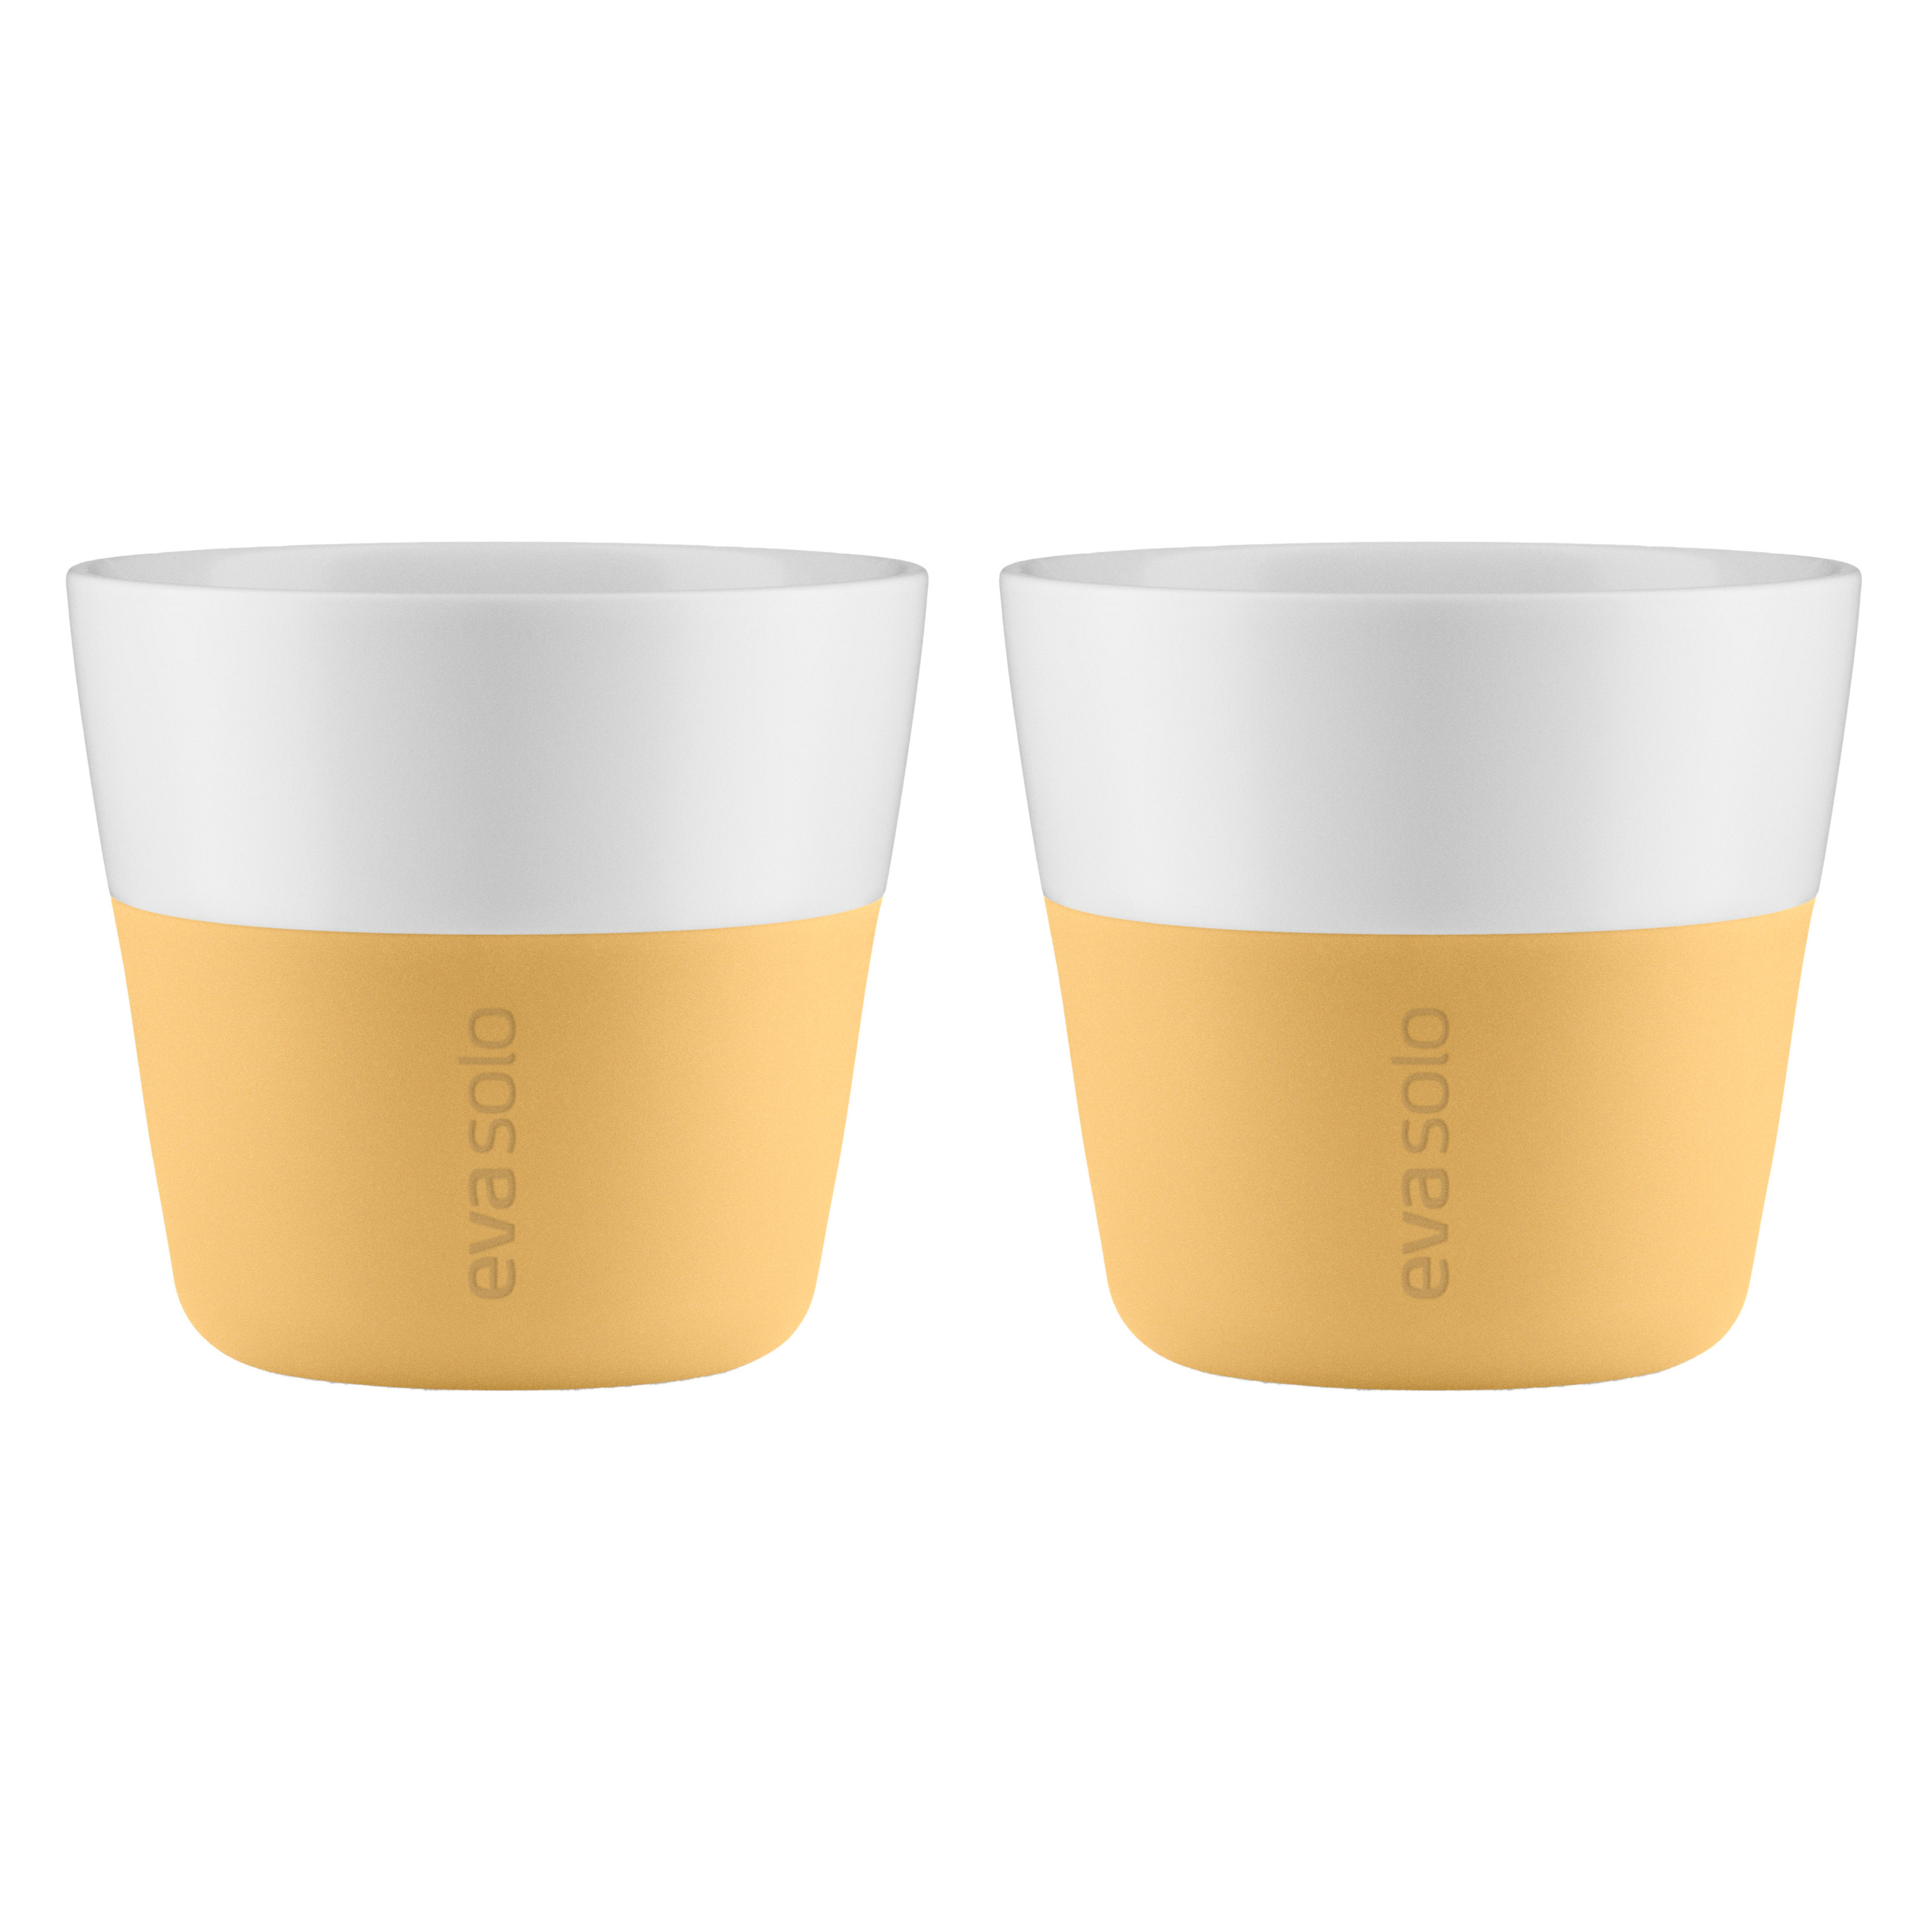 Eva Solo | 2 Espresso Tumbler Mugs | 3 oz Porcelain Coffee Cup Tumblers  with Silicone-coated Grip | …See more Eva Solo | 2 Espresso Tumbler Mugs |  3